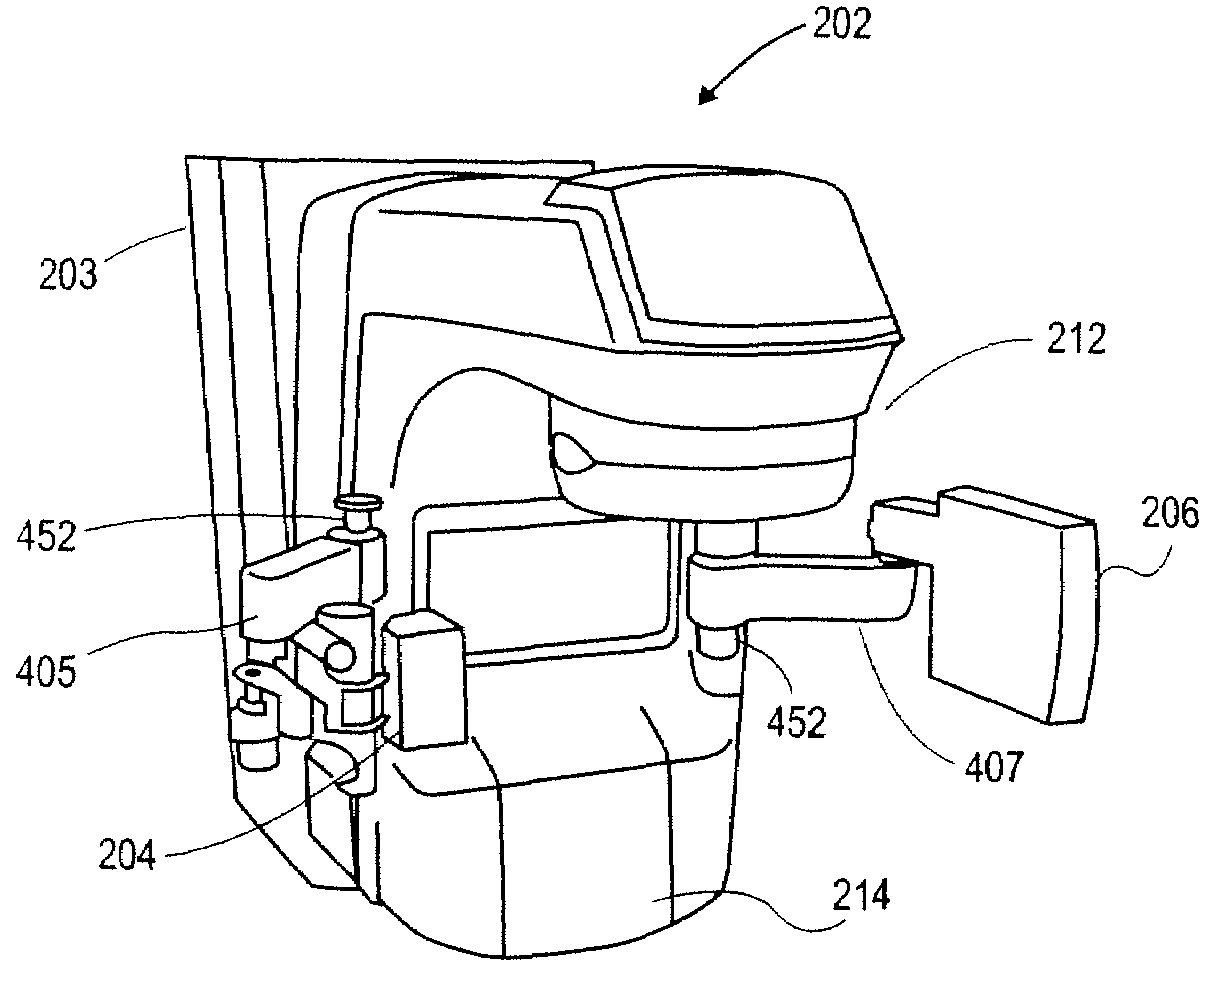 Imaging device for radiation treatment applications